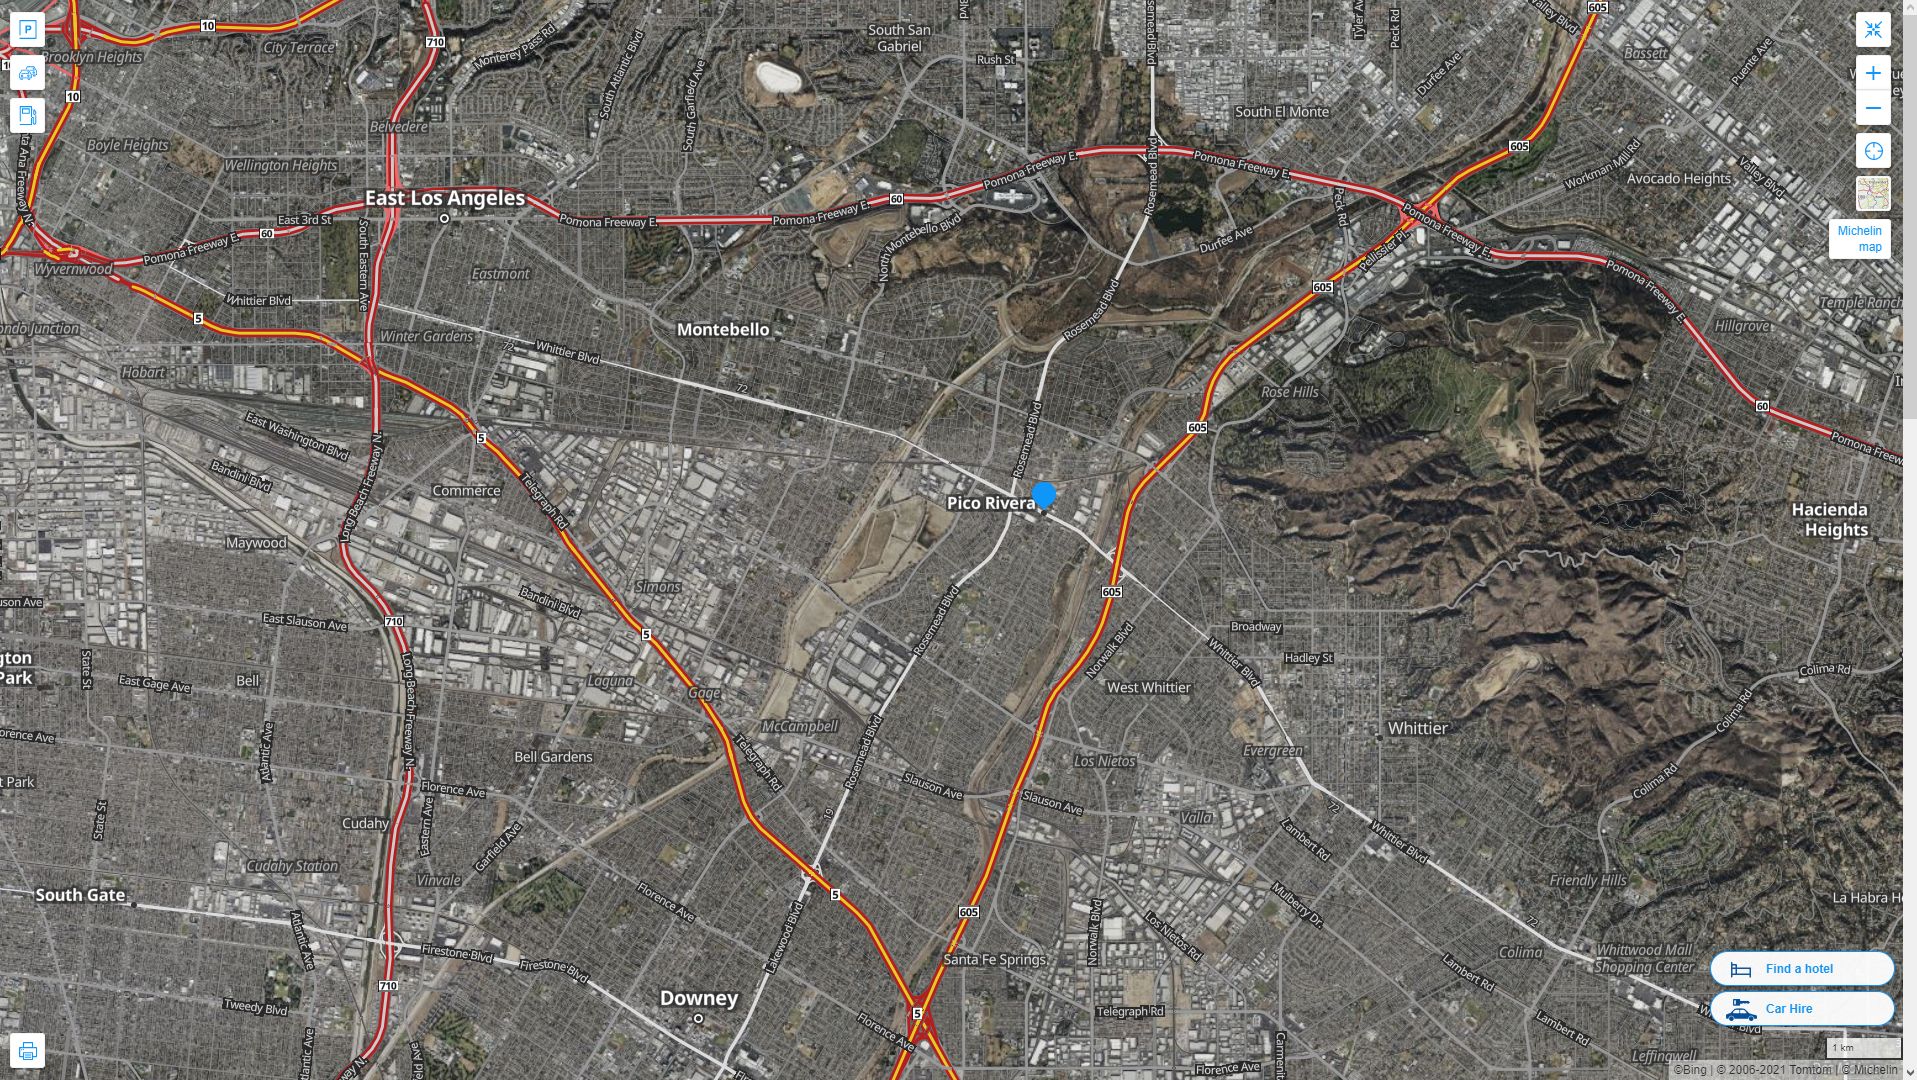 Pico Rivera California Highway and Road Map with Satellite View